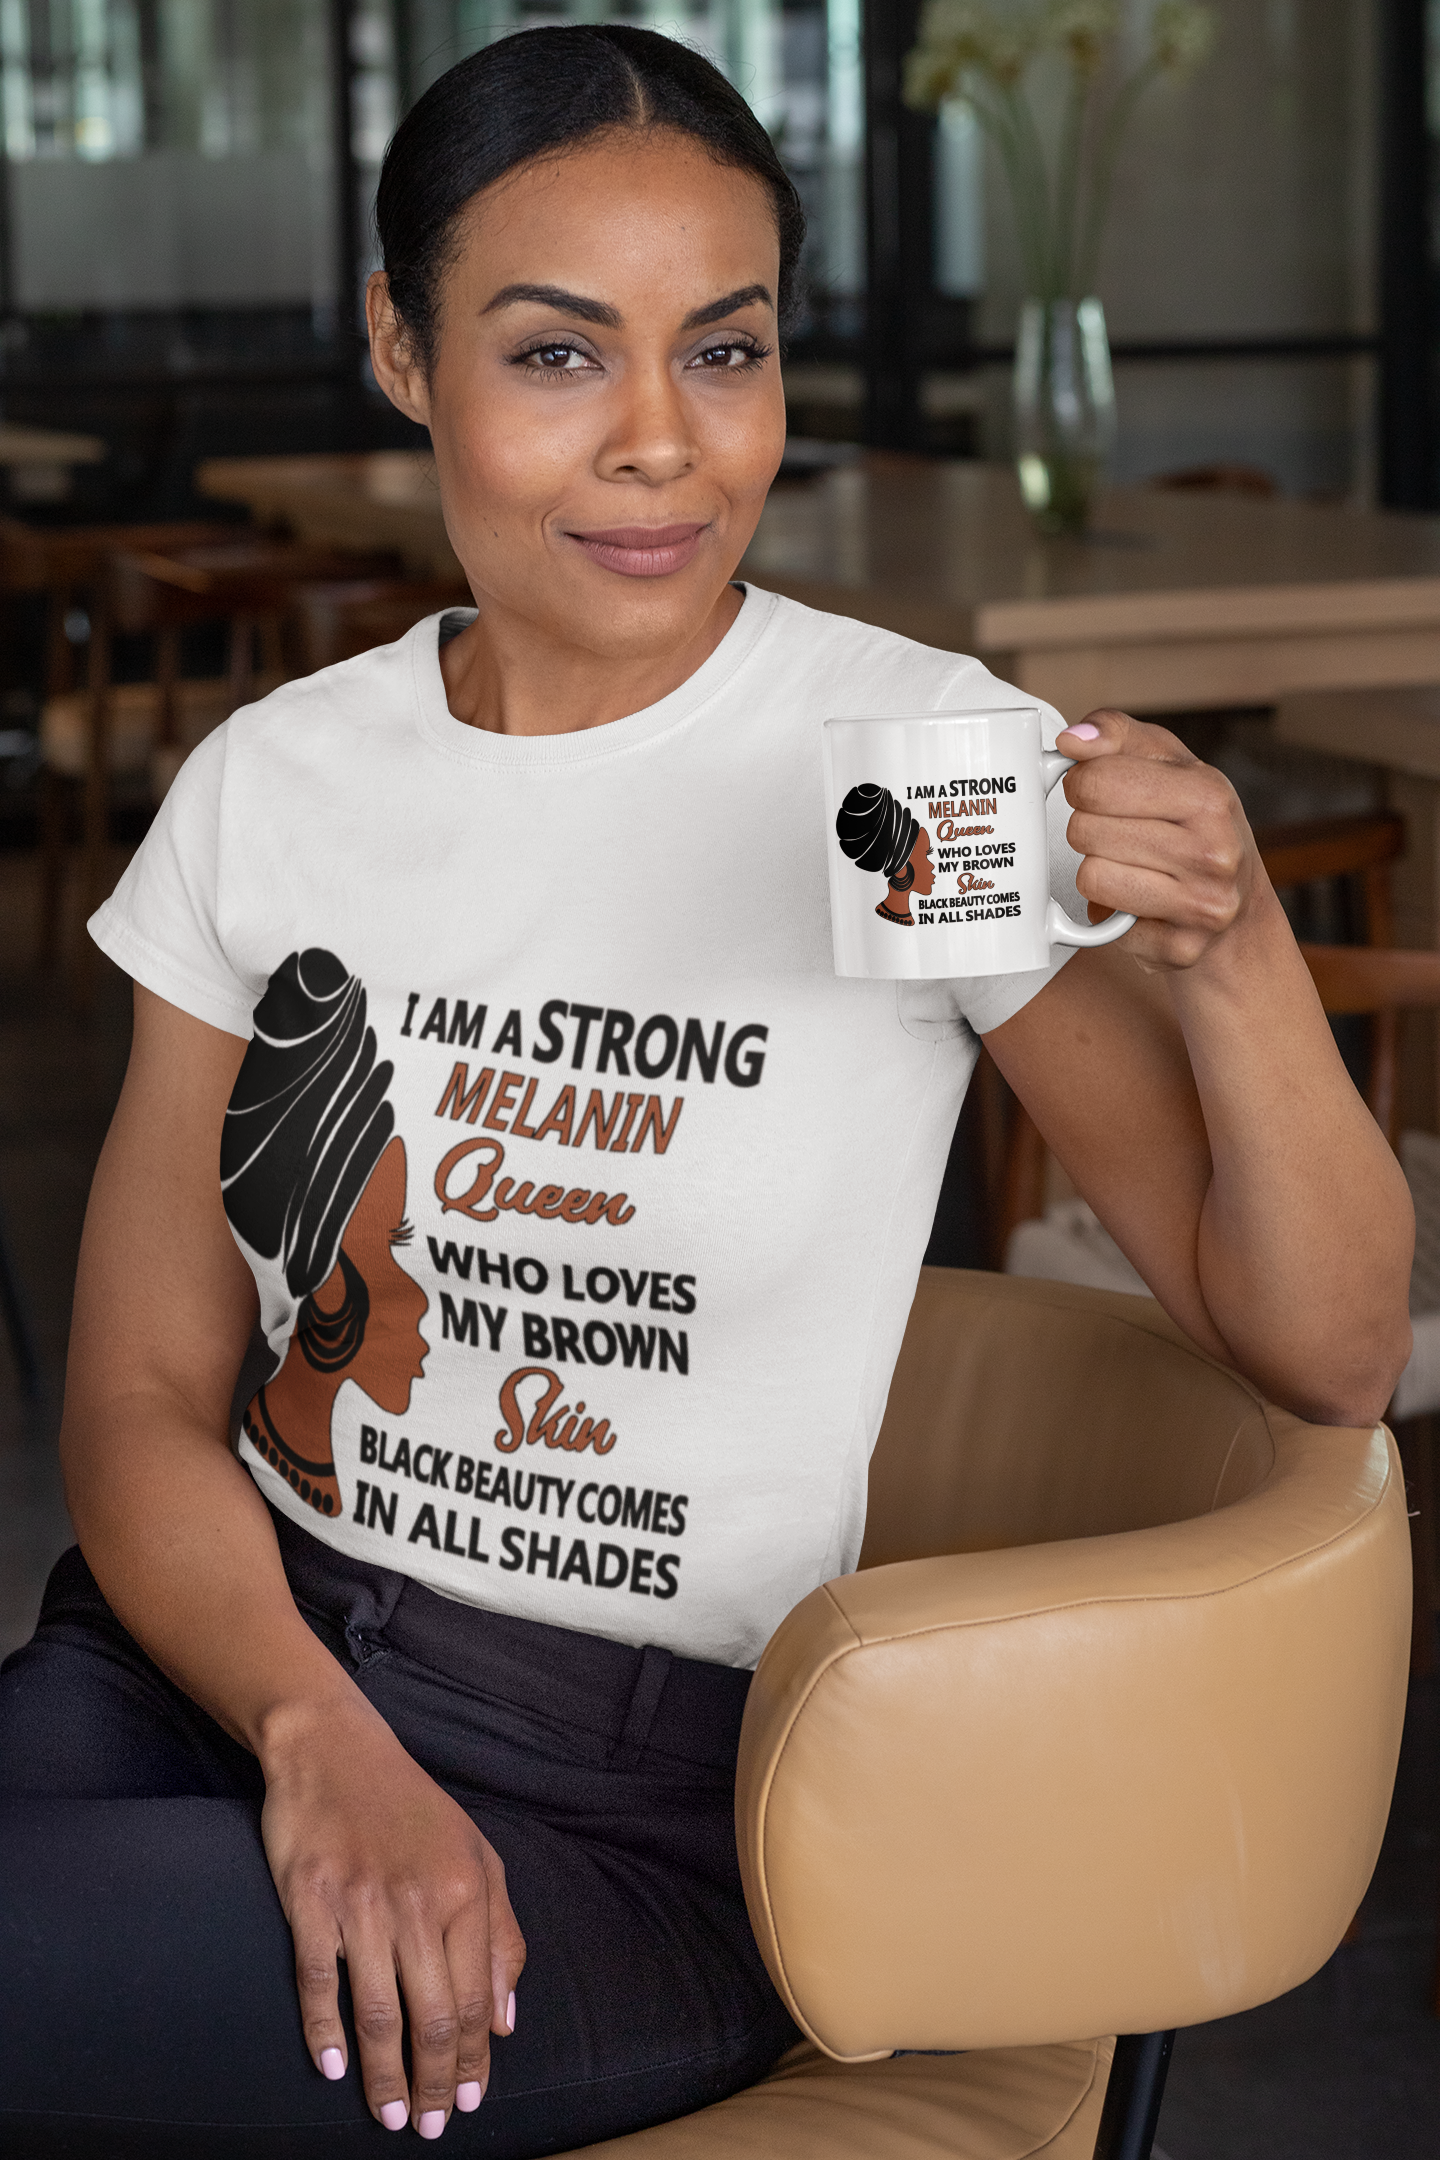 I-Am-A-Strong-Melanin-Queen-Who-Loves-My-Brown-Skin-Black-Beauty-Comes-In-All-Shades-Mug